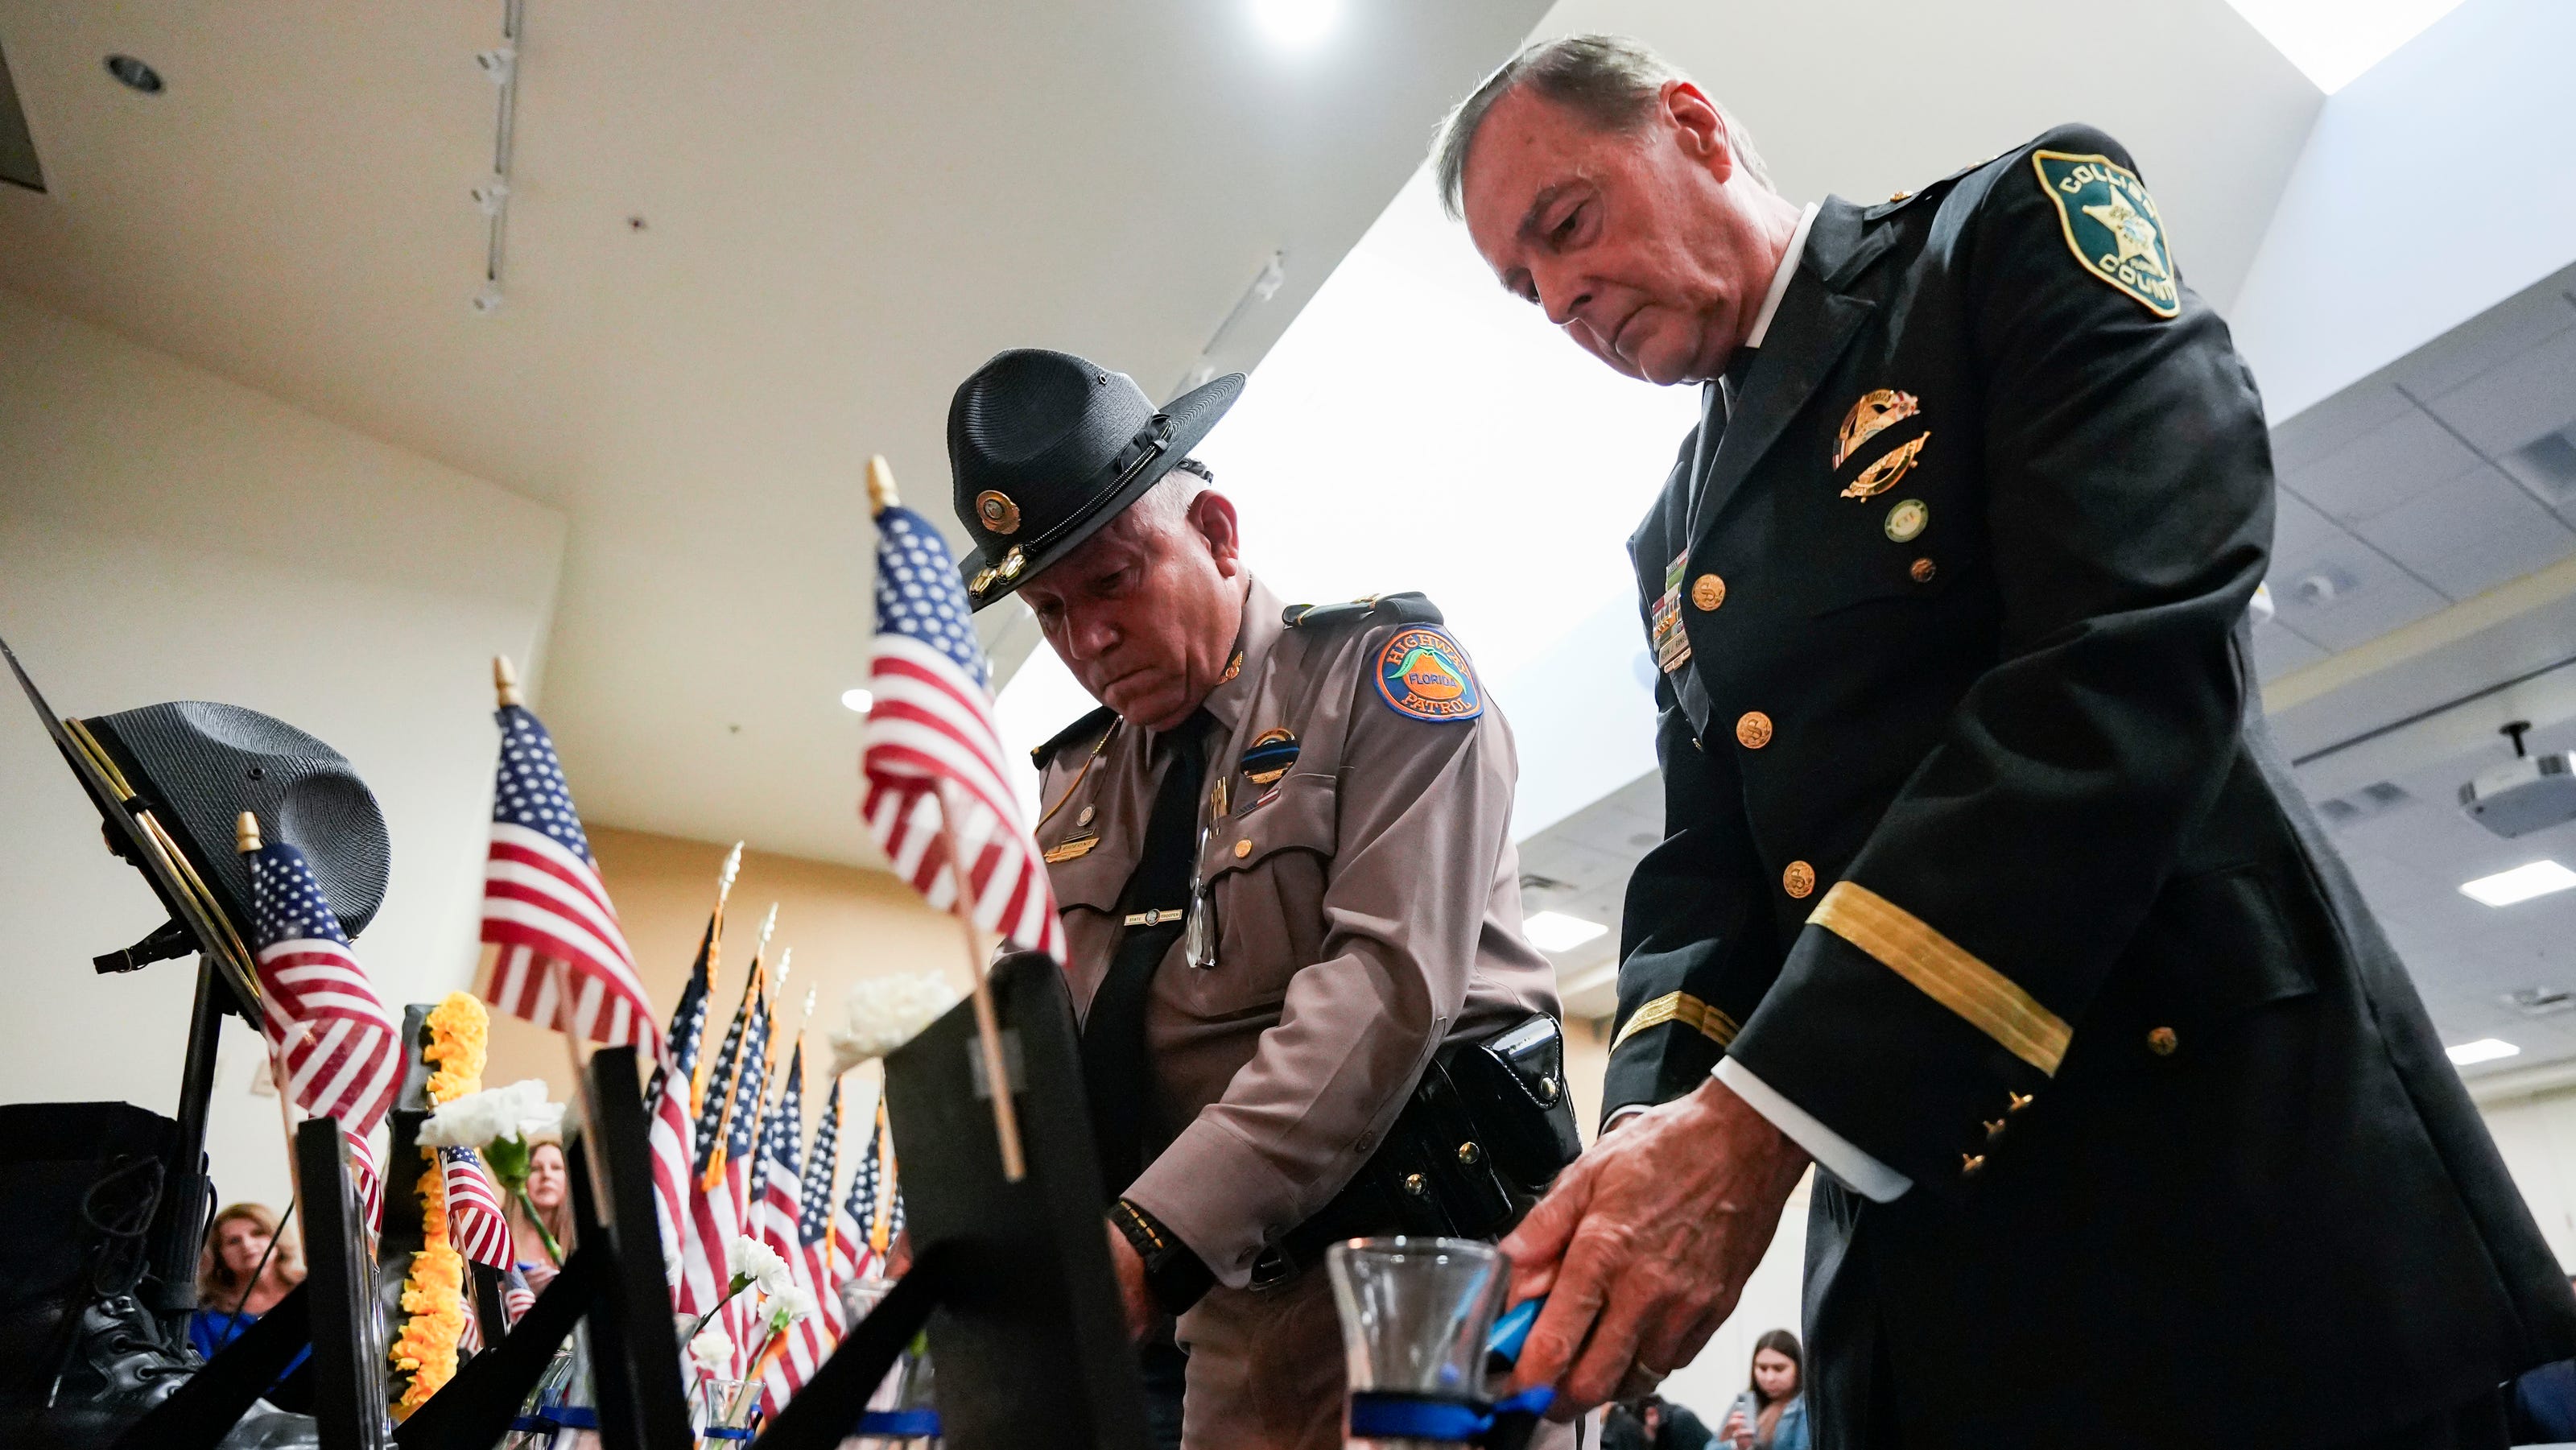 Collier County honors fallen deputies, officers who died protecting community